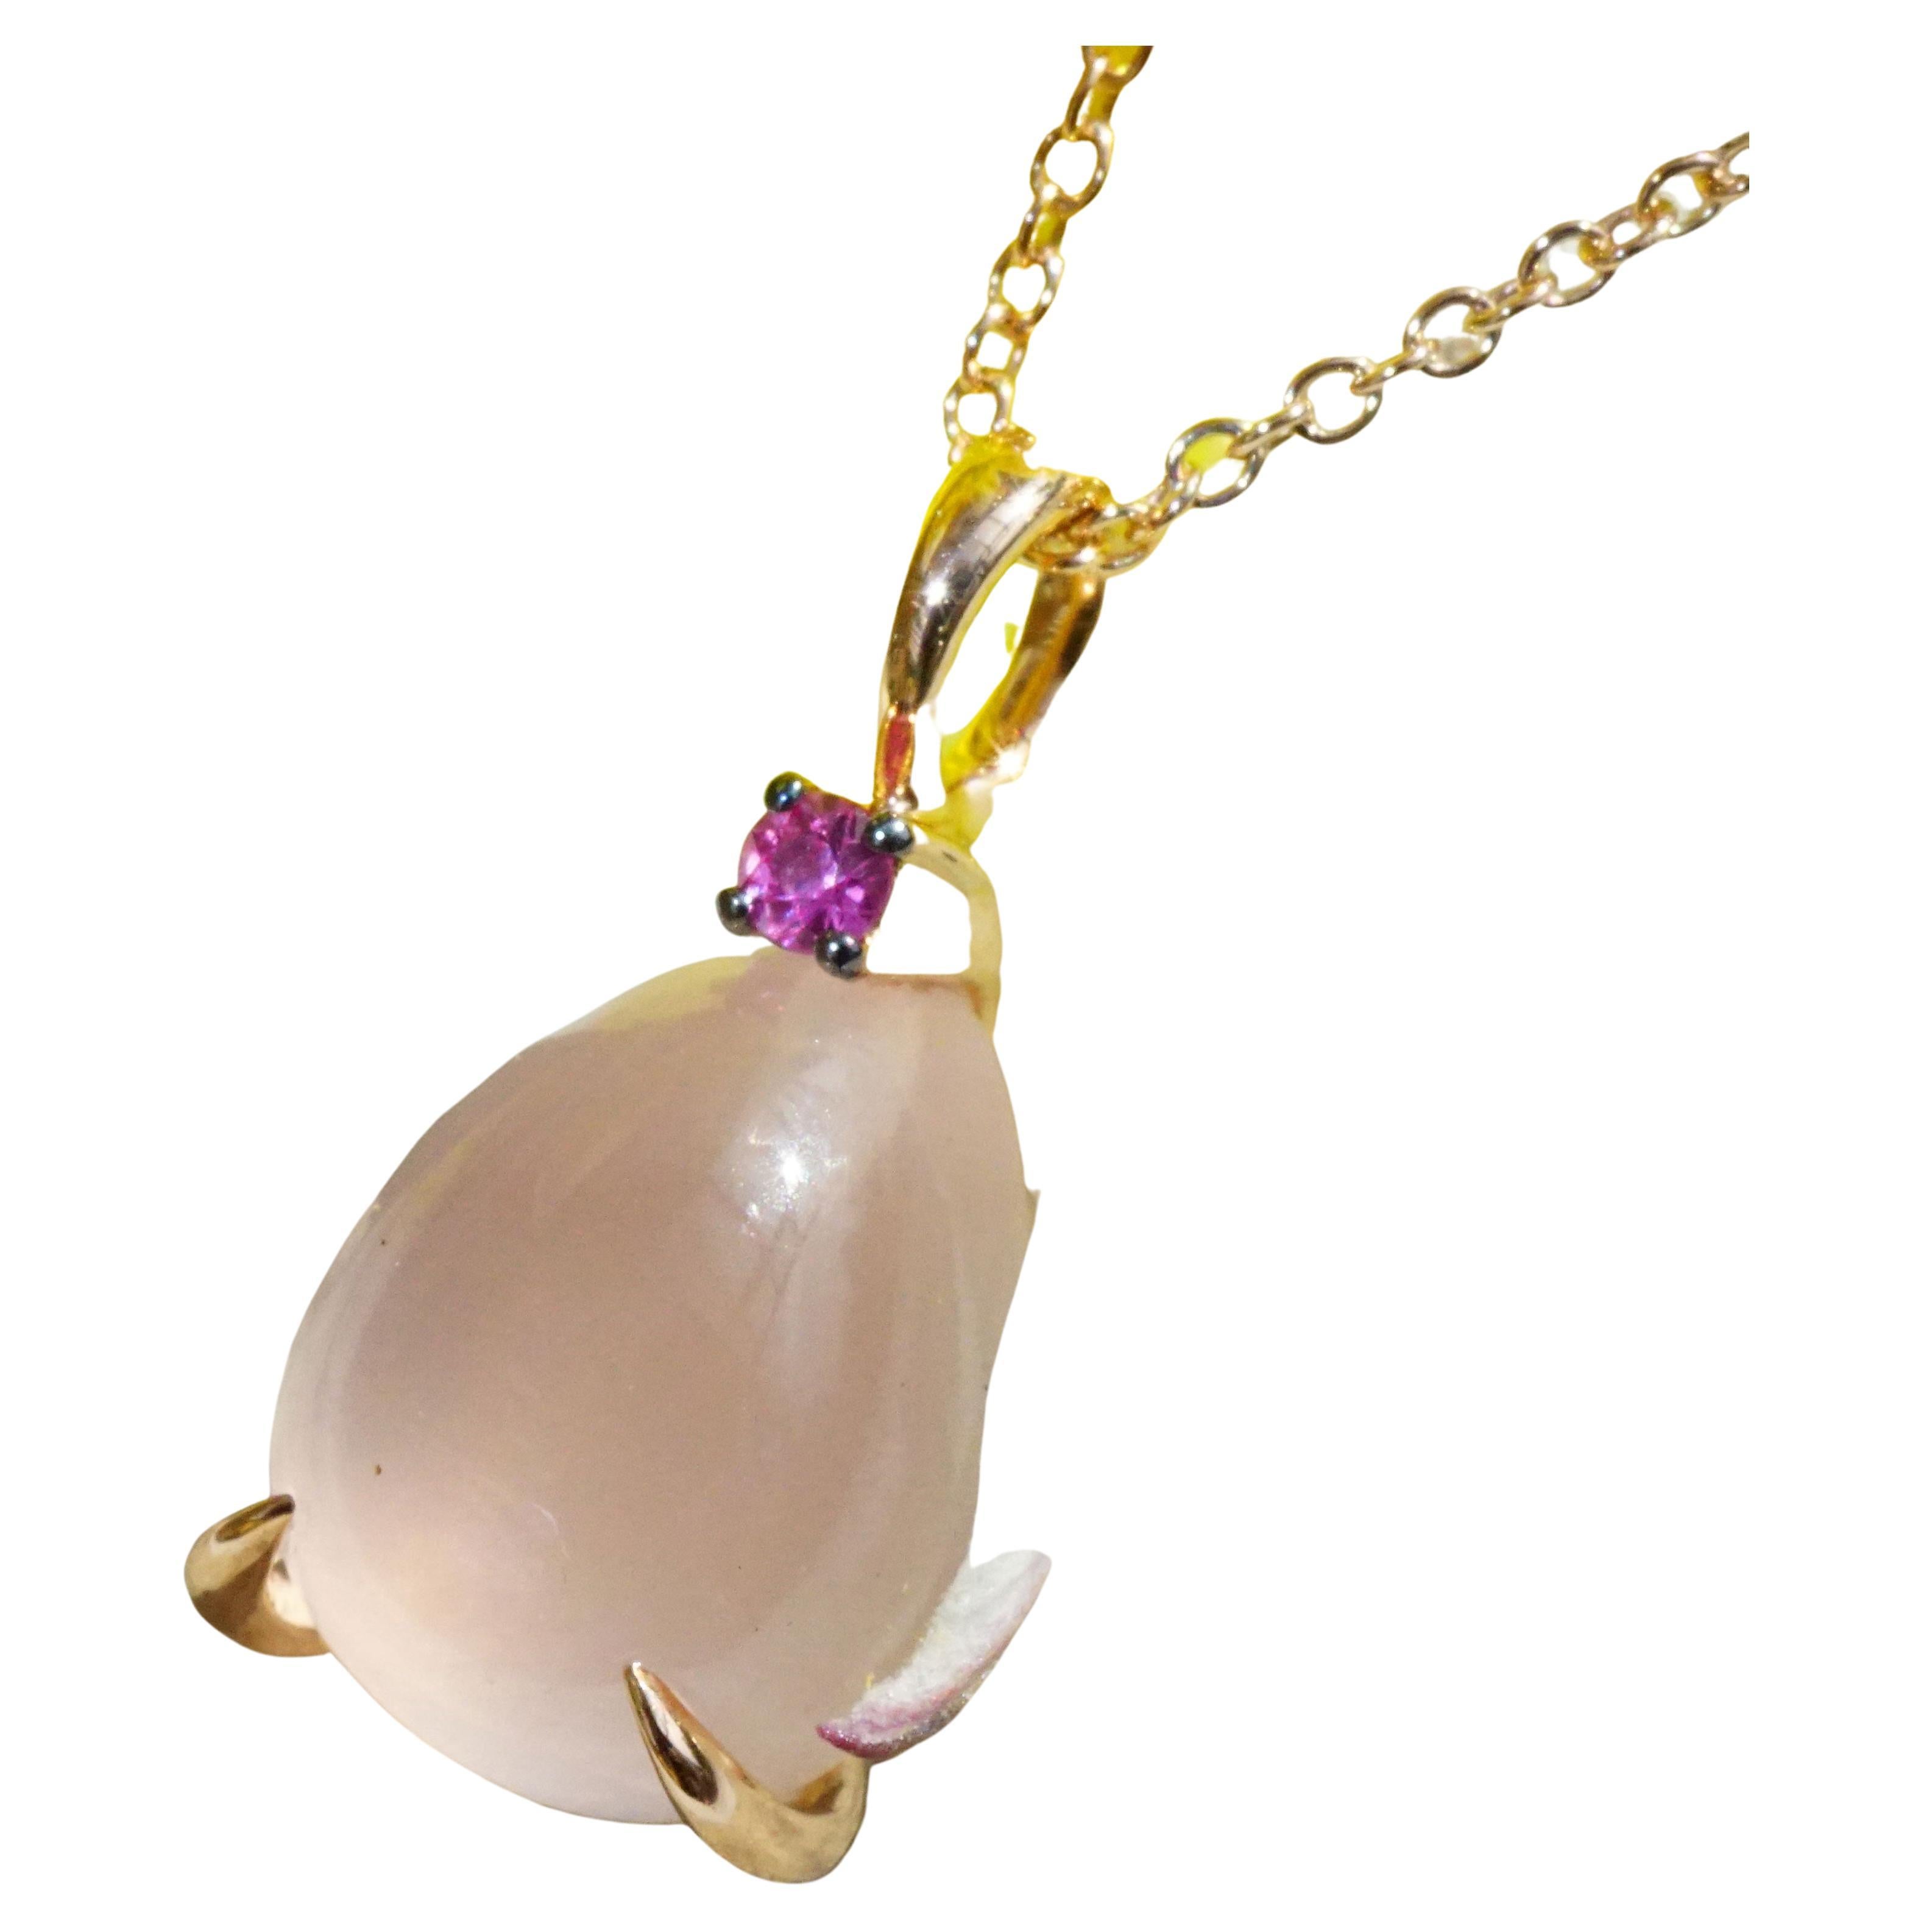 drop pendant so sweet, made in a traditional goldsmith's factory in Valenza/Italy
this beautiful rosequartz of 4 ct, AAA+, brilliant, color distribution and cut is very good, 
perfectly set in 750 rose gold, one fine pink saphire is a eycatcher too,